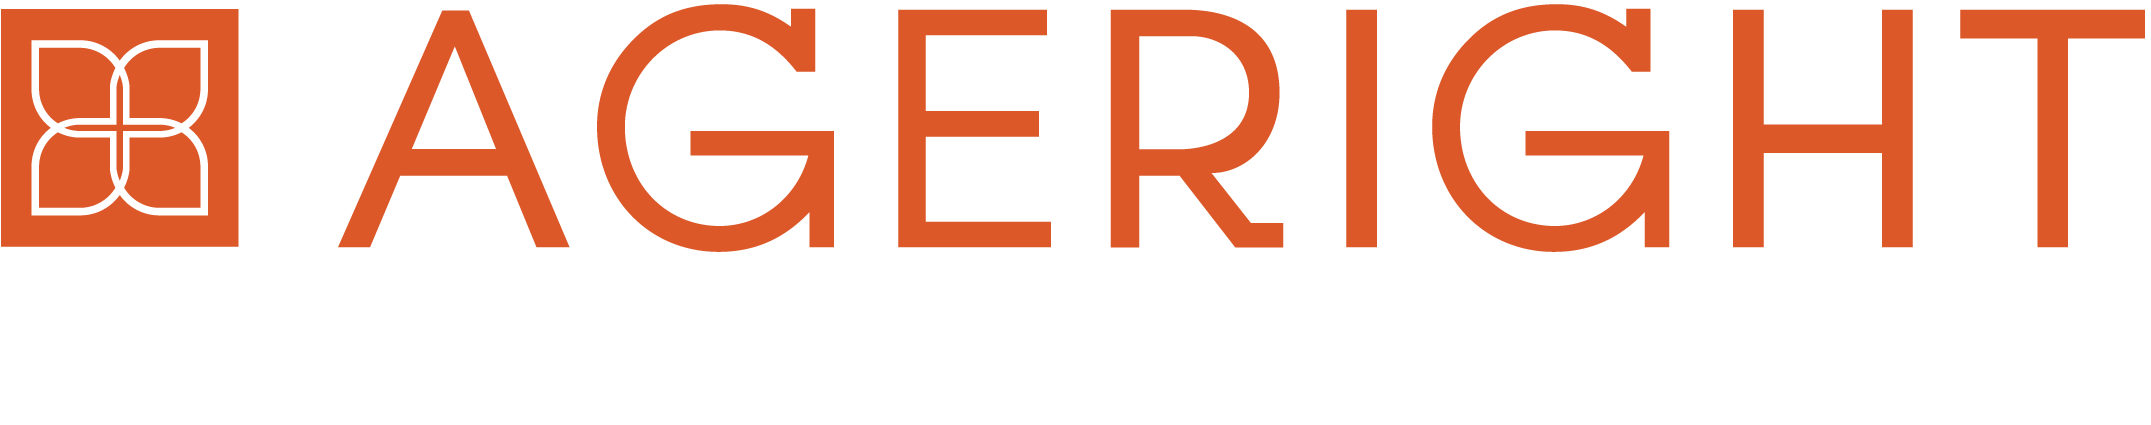 AgeRight Care Management Solutions logo